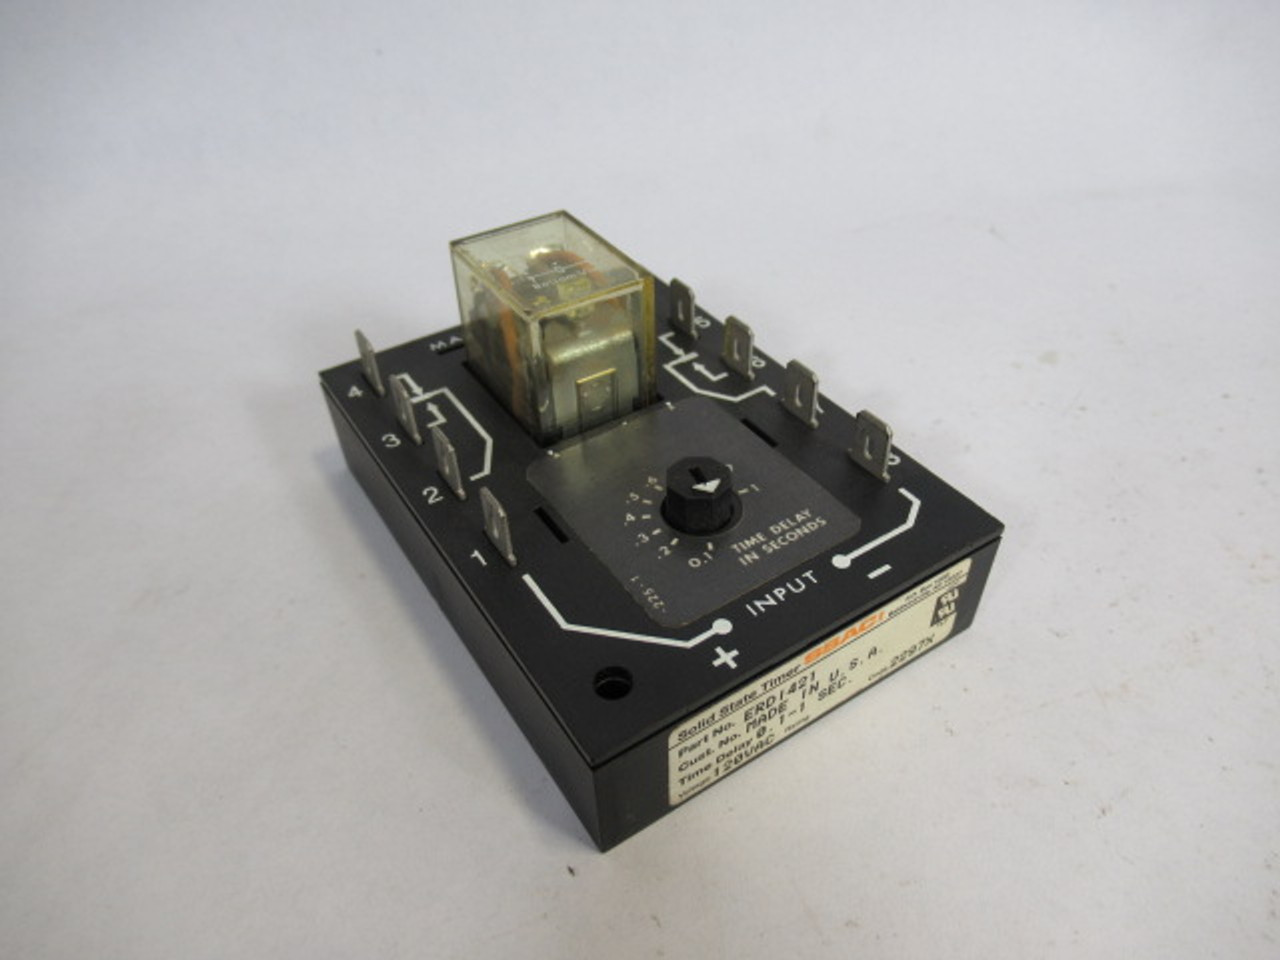 SSAC ERD1421 Solid State Timer 0.1-1Sec C/W Omron 110/120VAC Relay USED